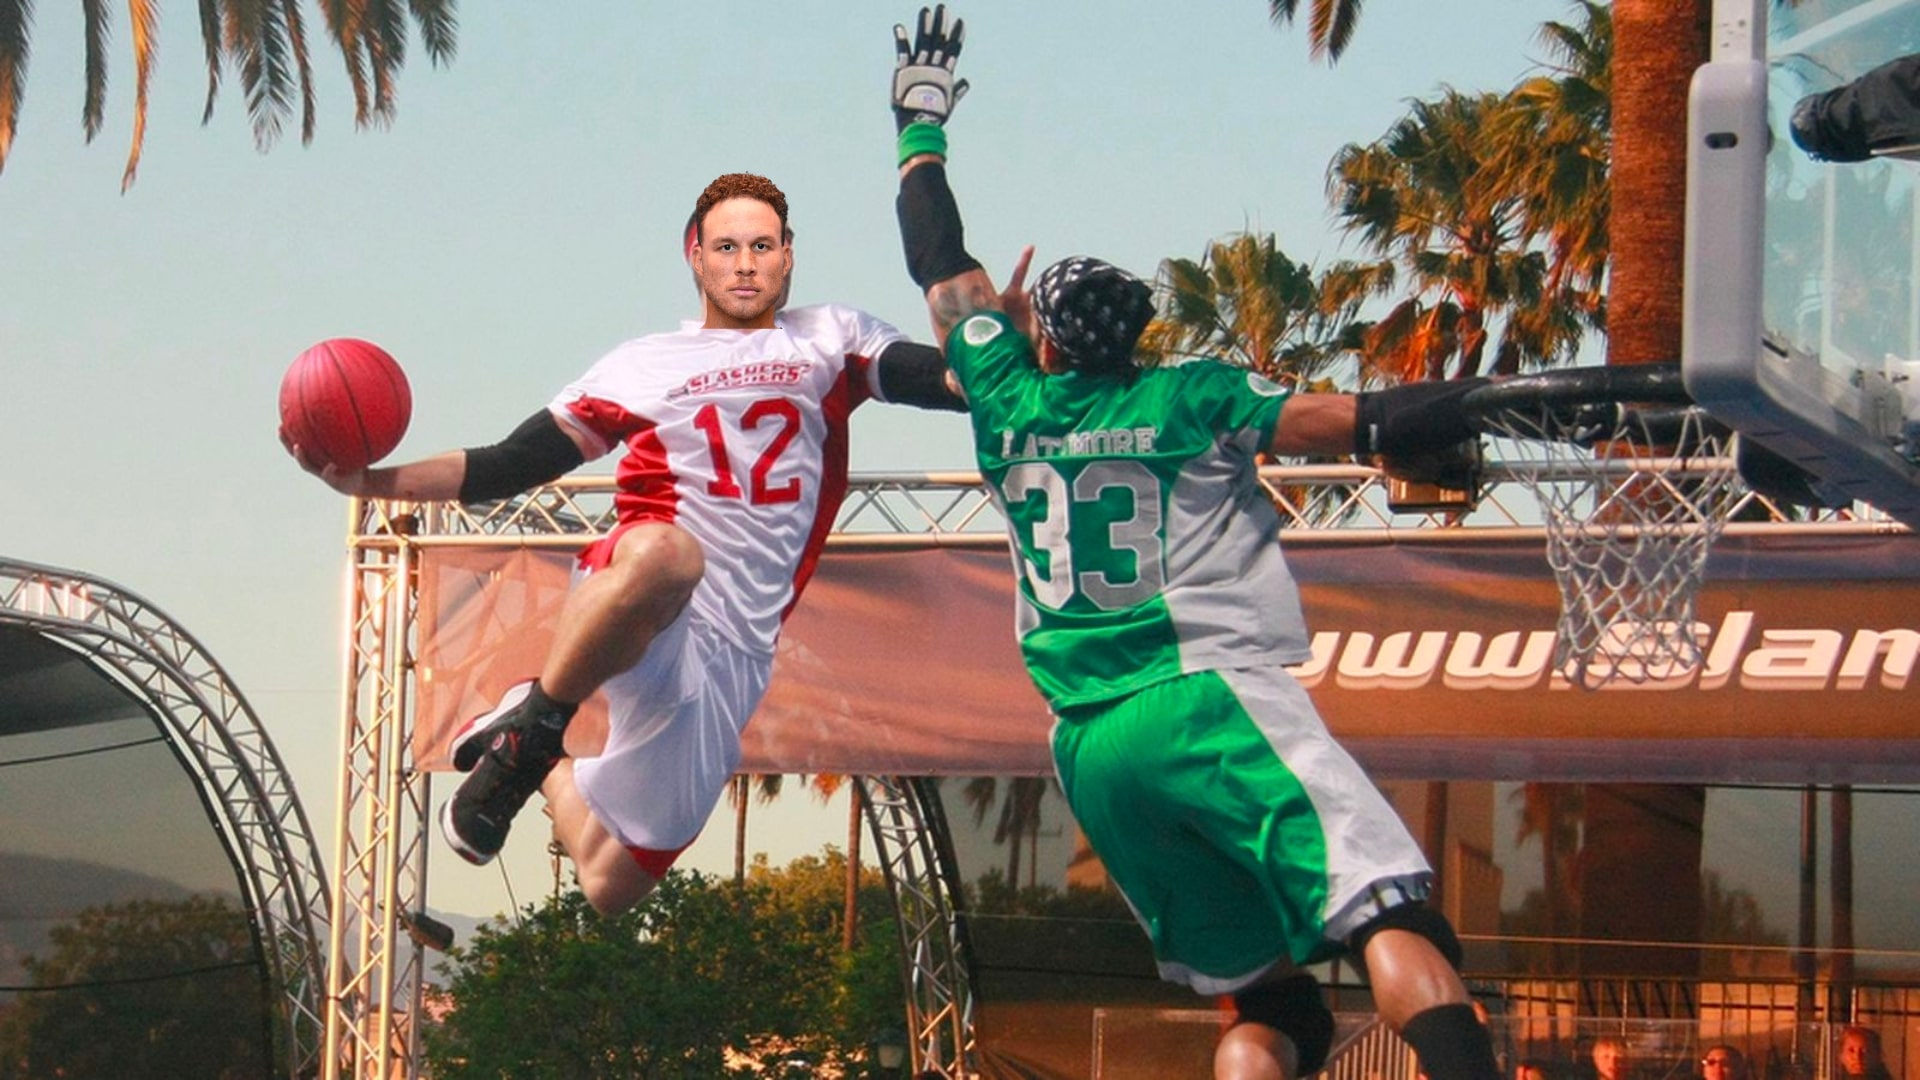 SlamBall is Back After an $11M Series A Round